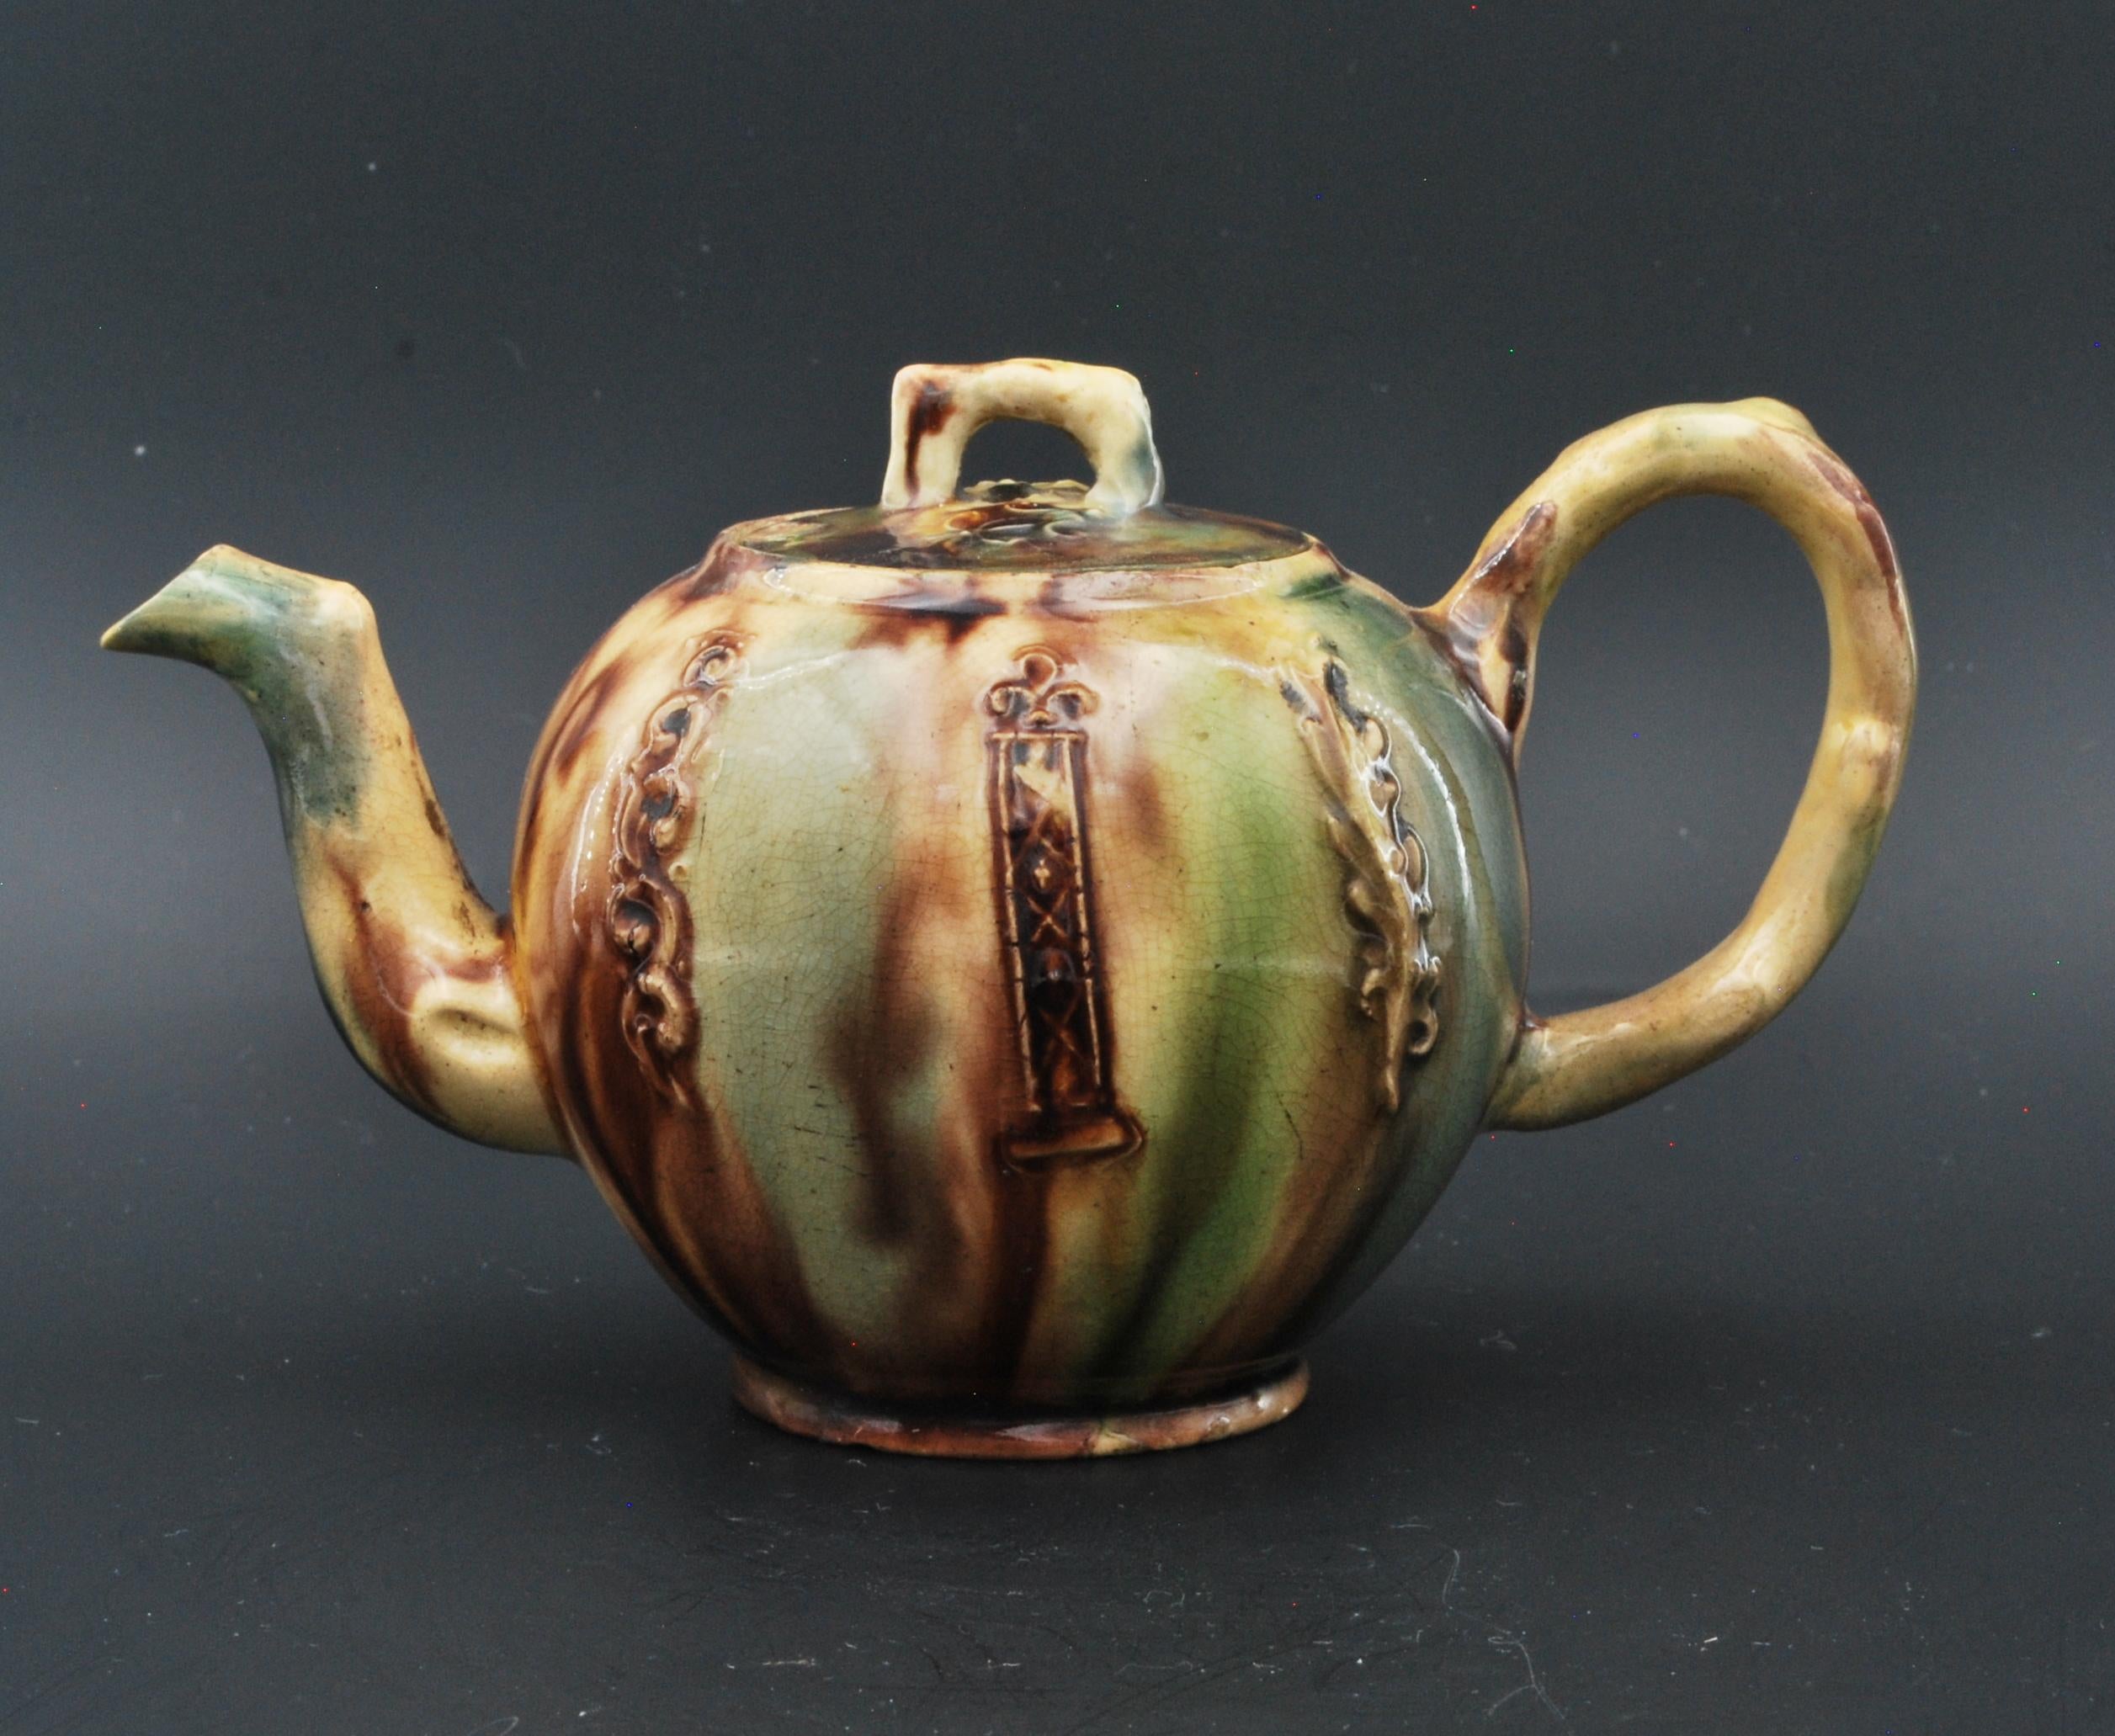 A charming, tiny, one-cup teapot in creamware with crabstock handle and spout, and ‘Whieldonware’ decoration. Teapots of this size date from the time each person was given his own pot, and tea bowls were very small.